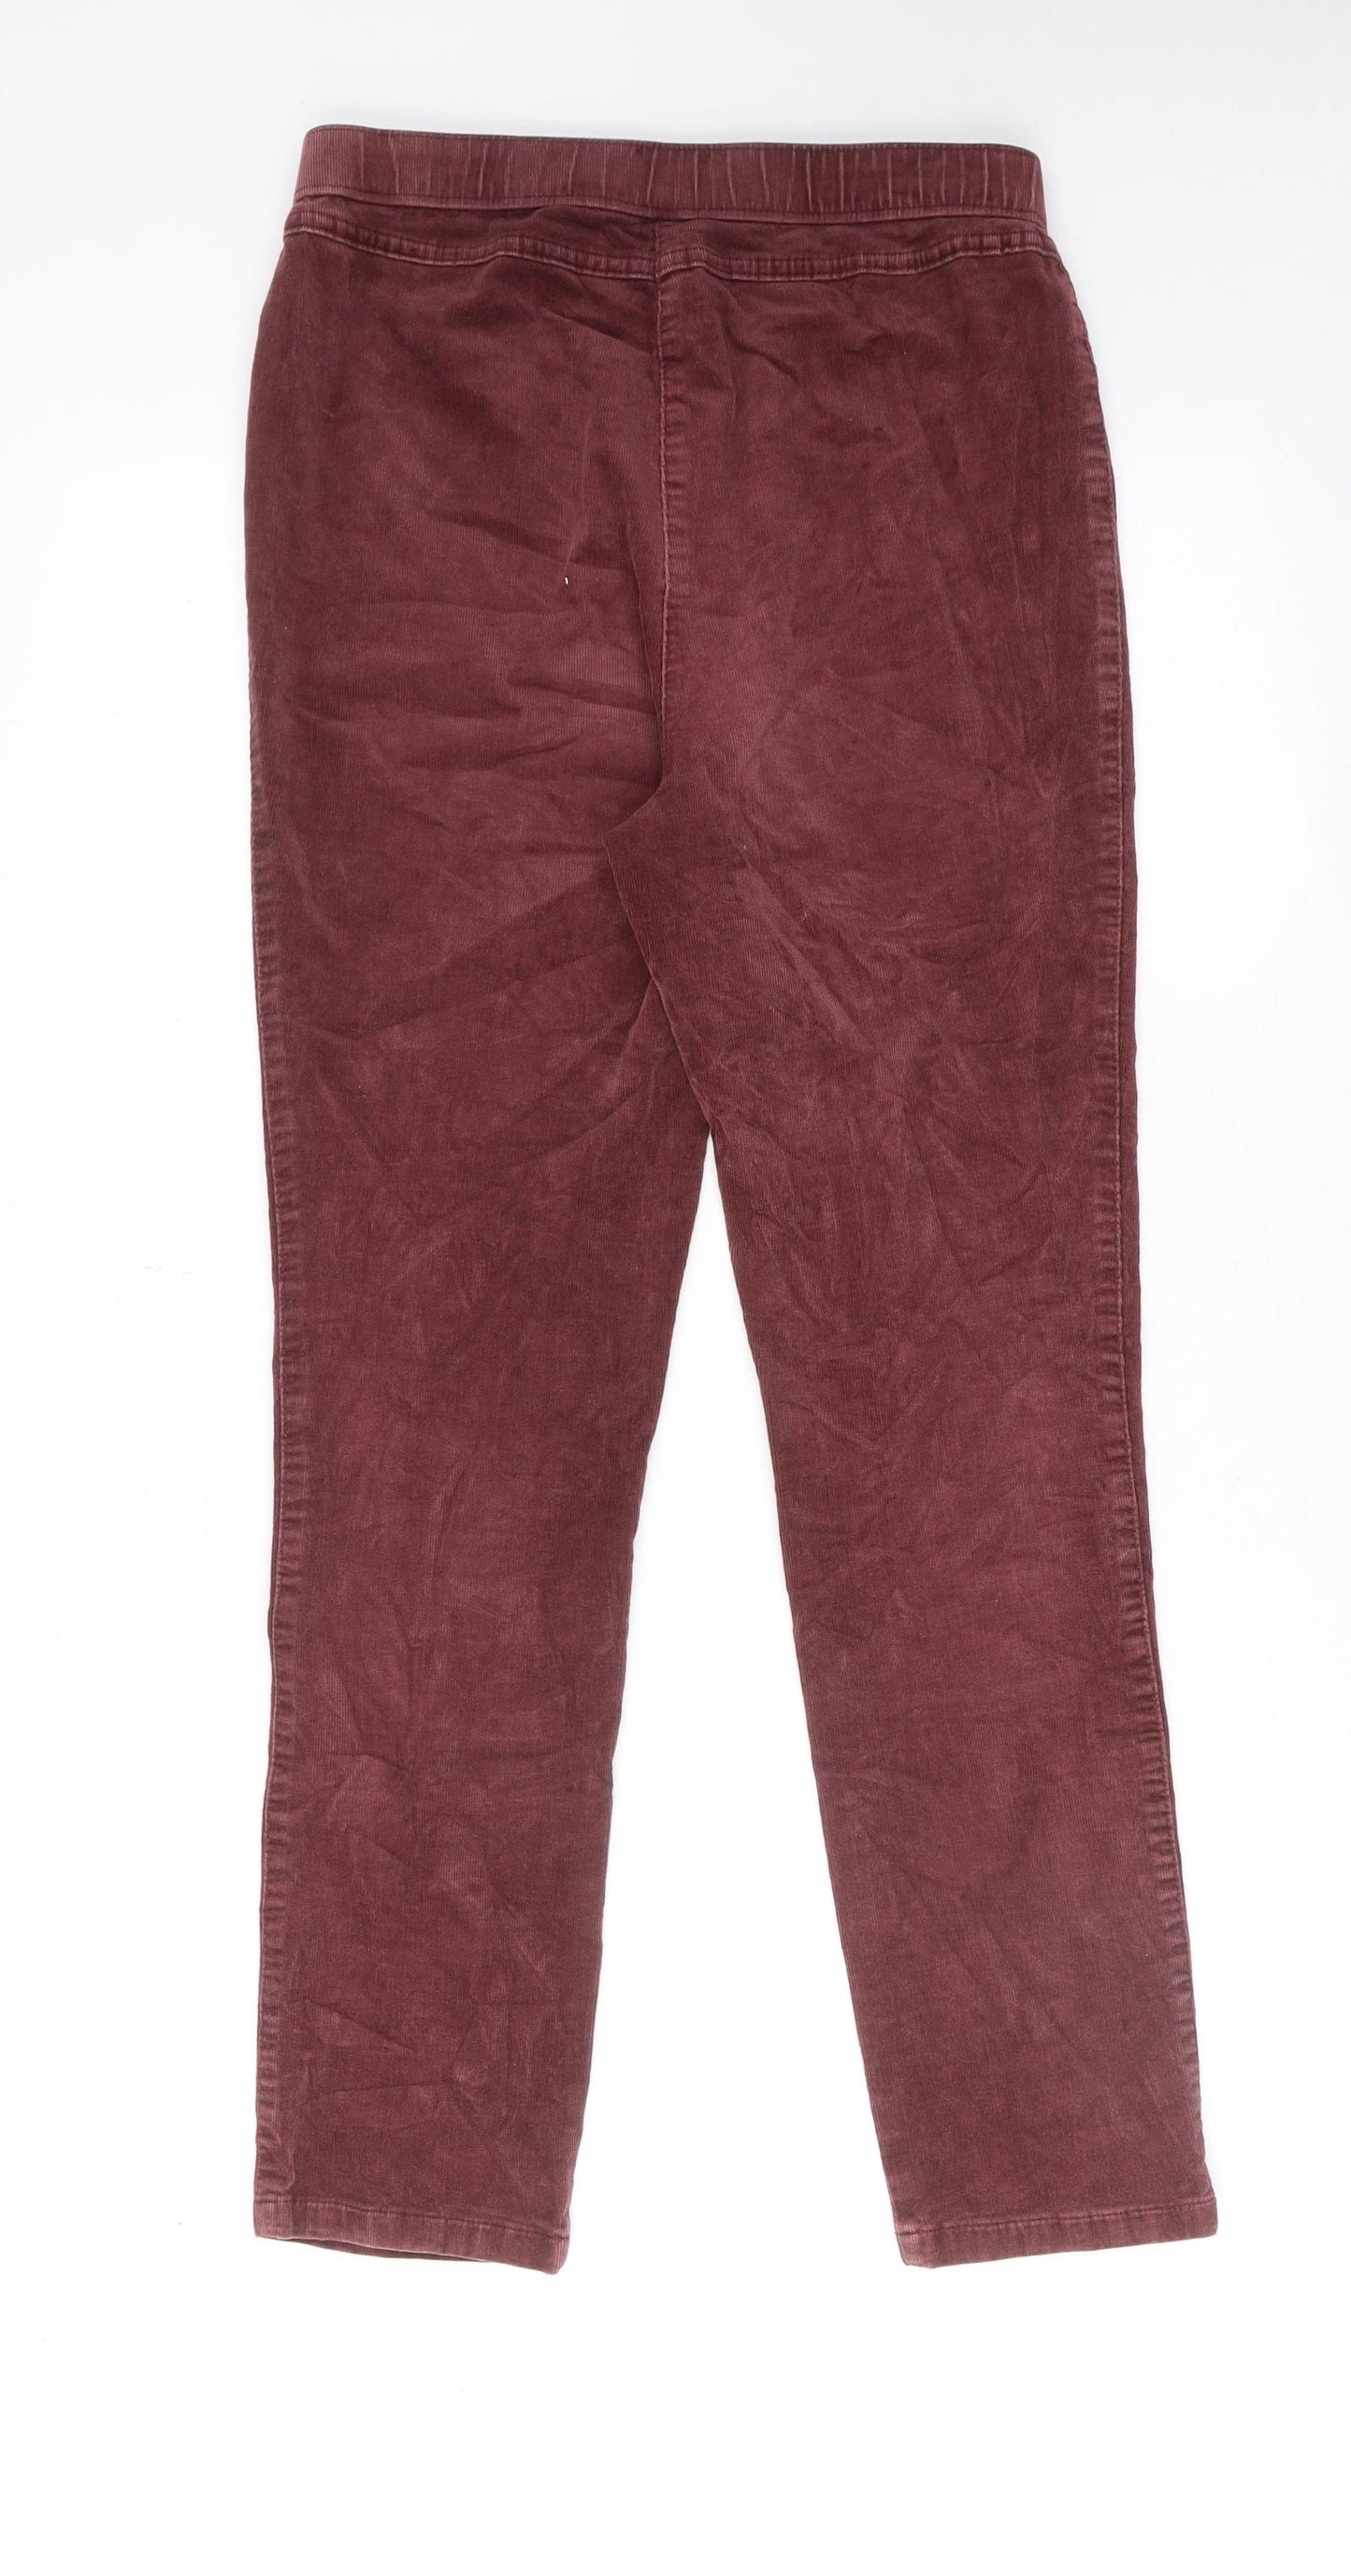 Classic Womens Brown Cotton Trousers Size 10 Regular